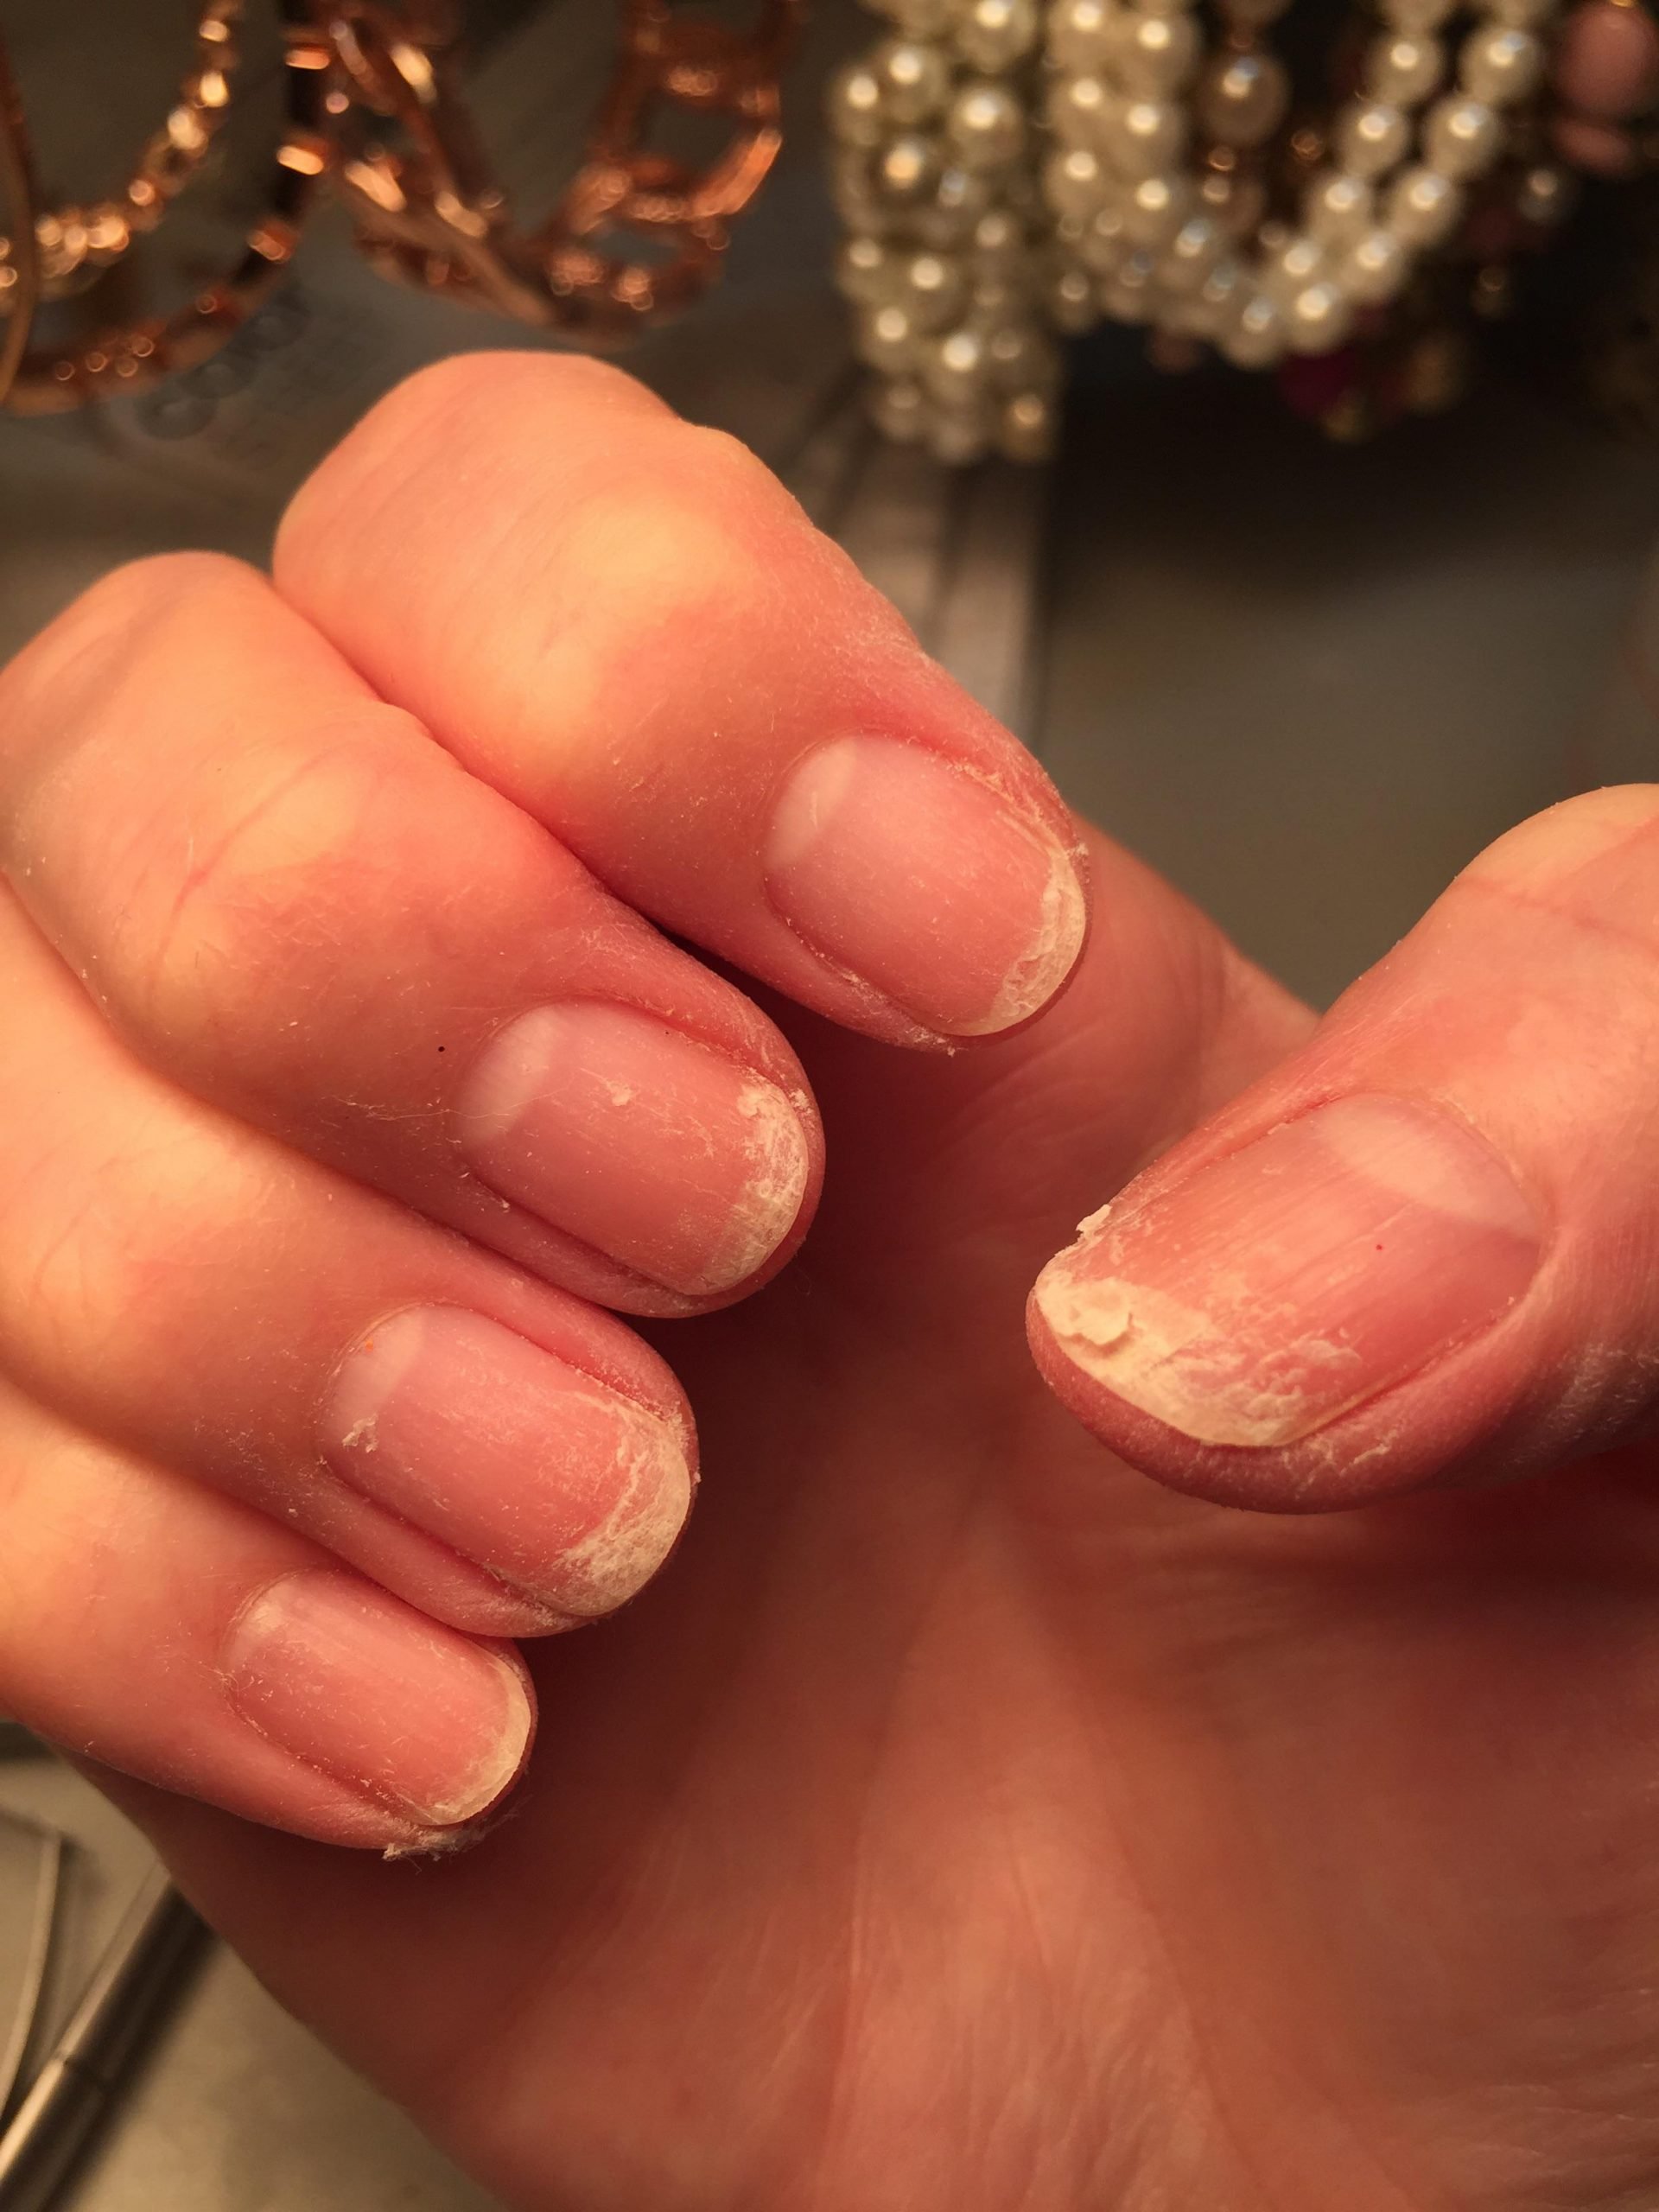 Help! My nails are peeling. What are your favorite ...